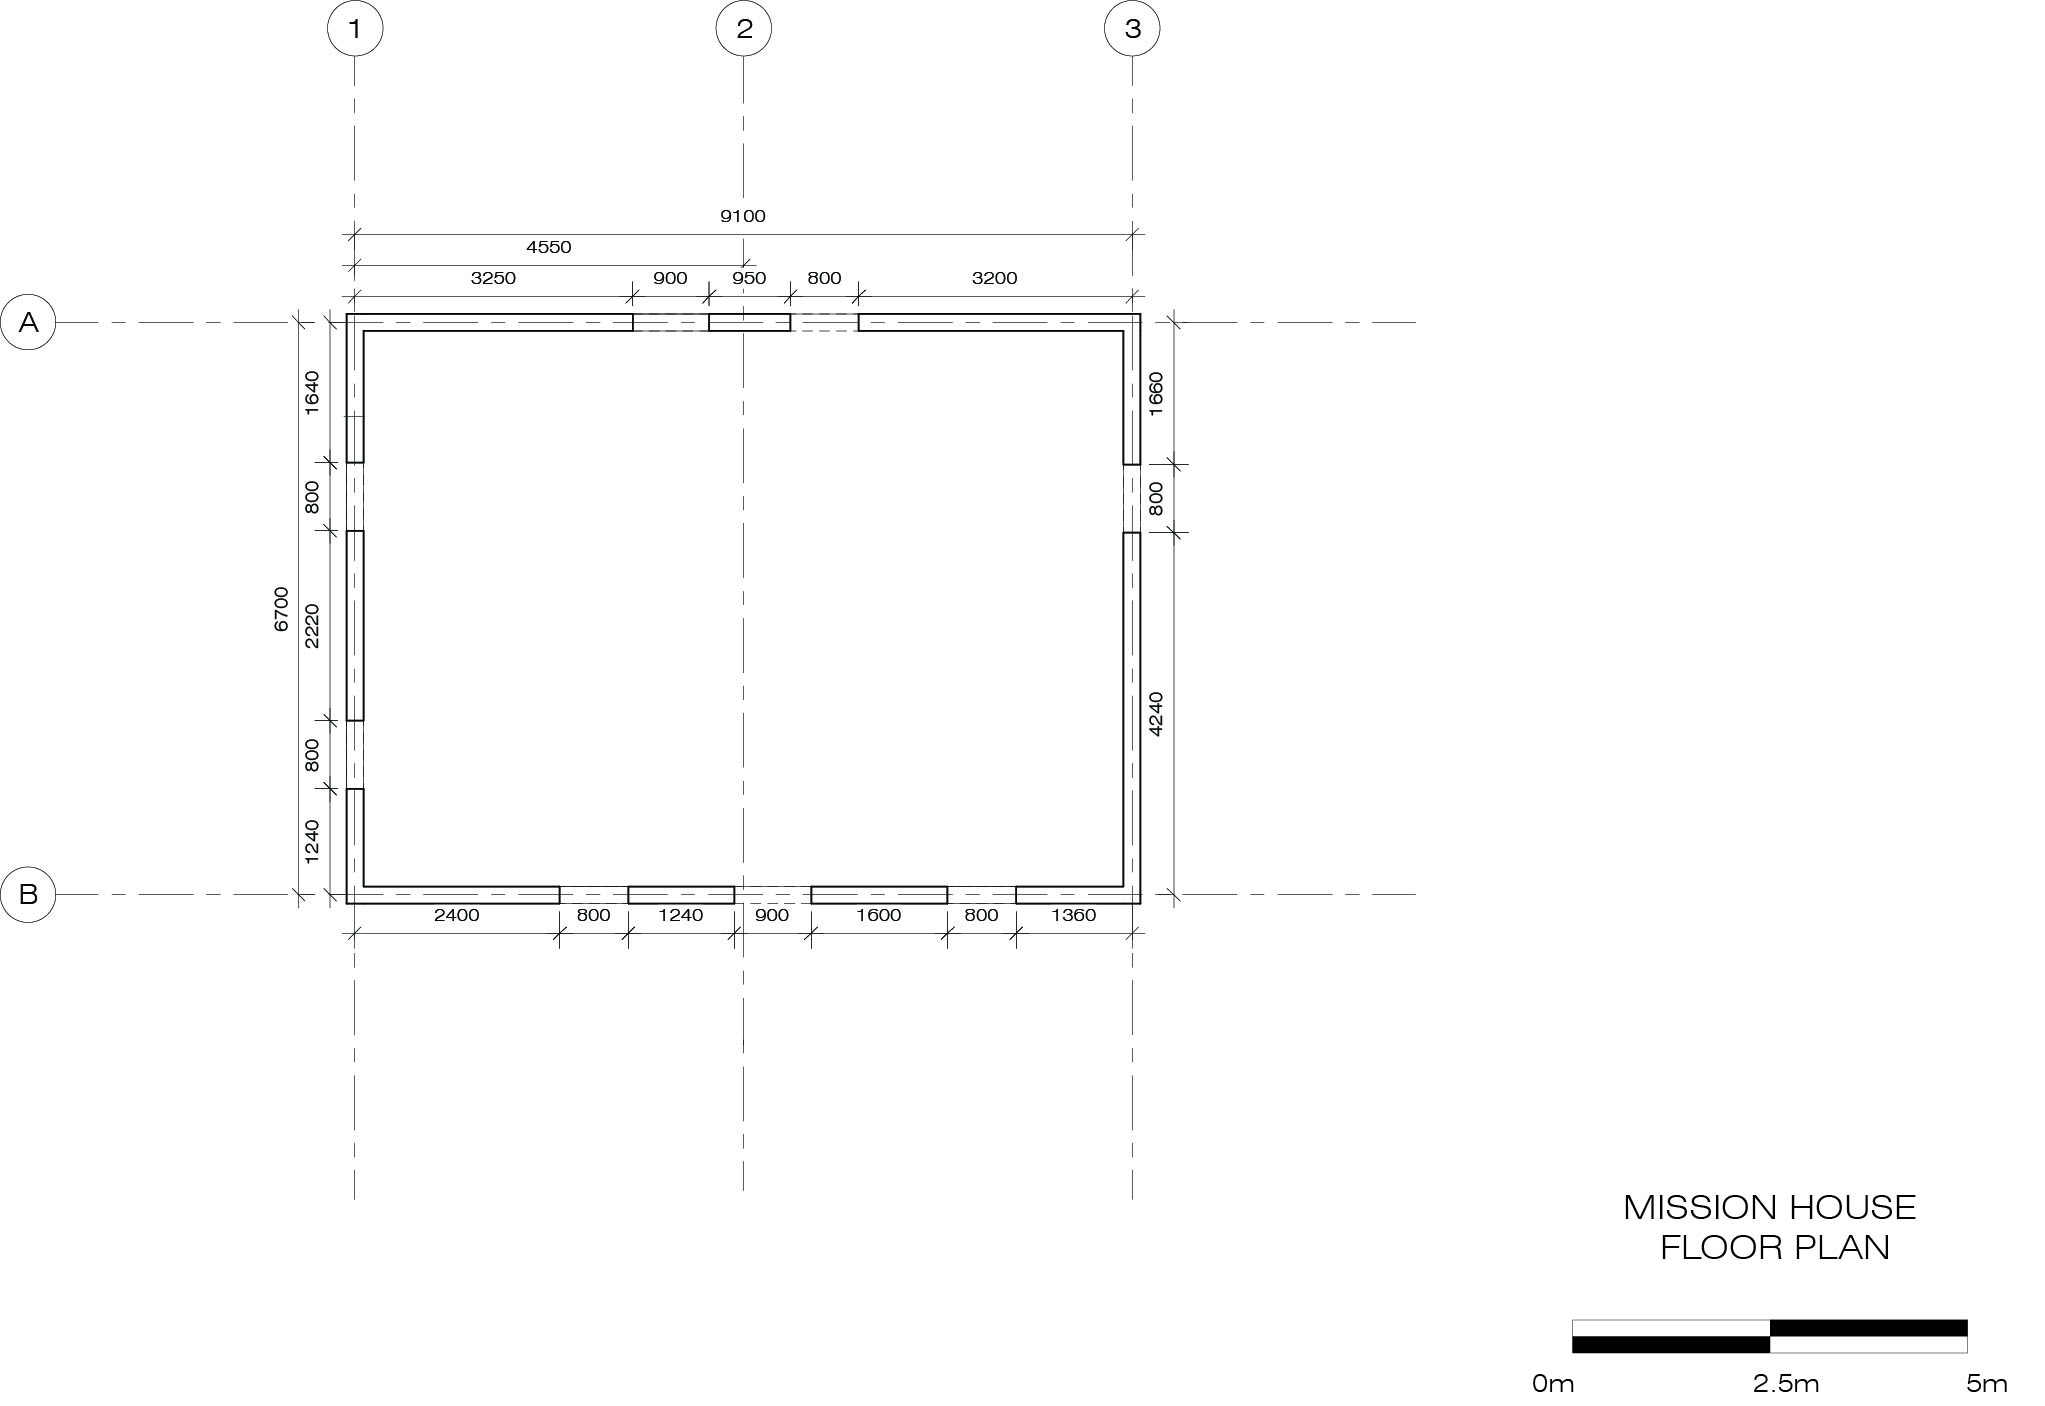 Floor Plan of Anglican Mission House